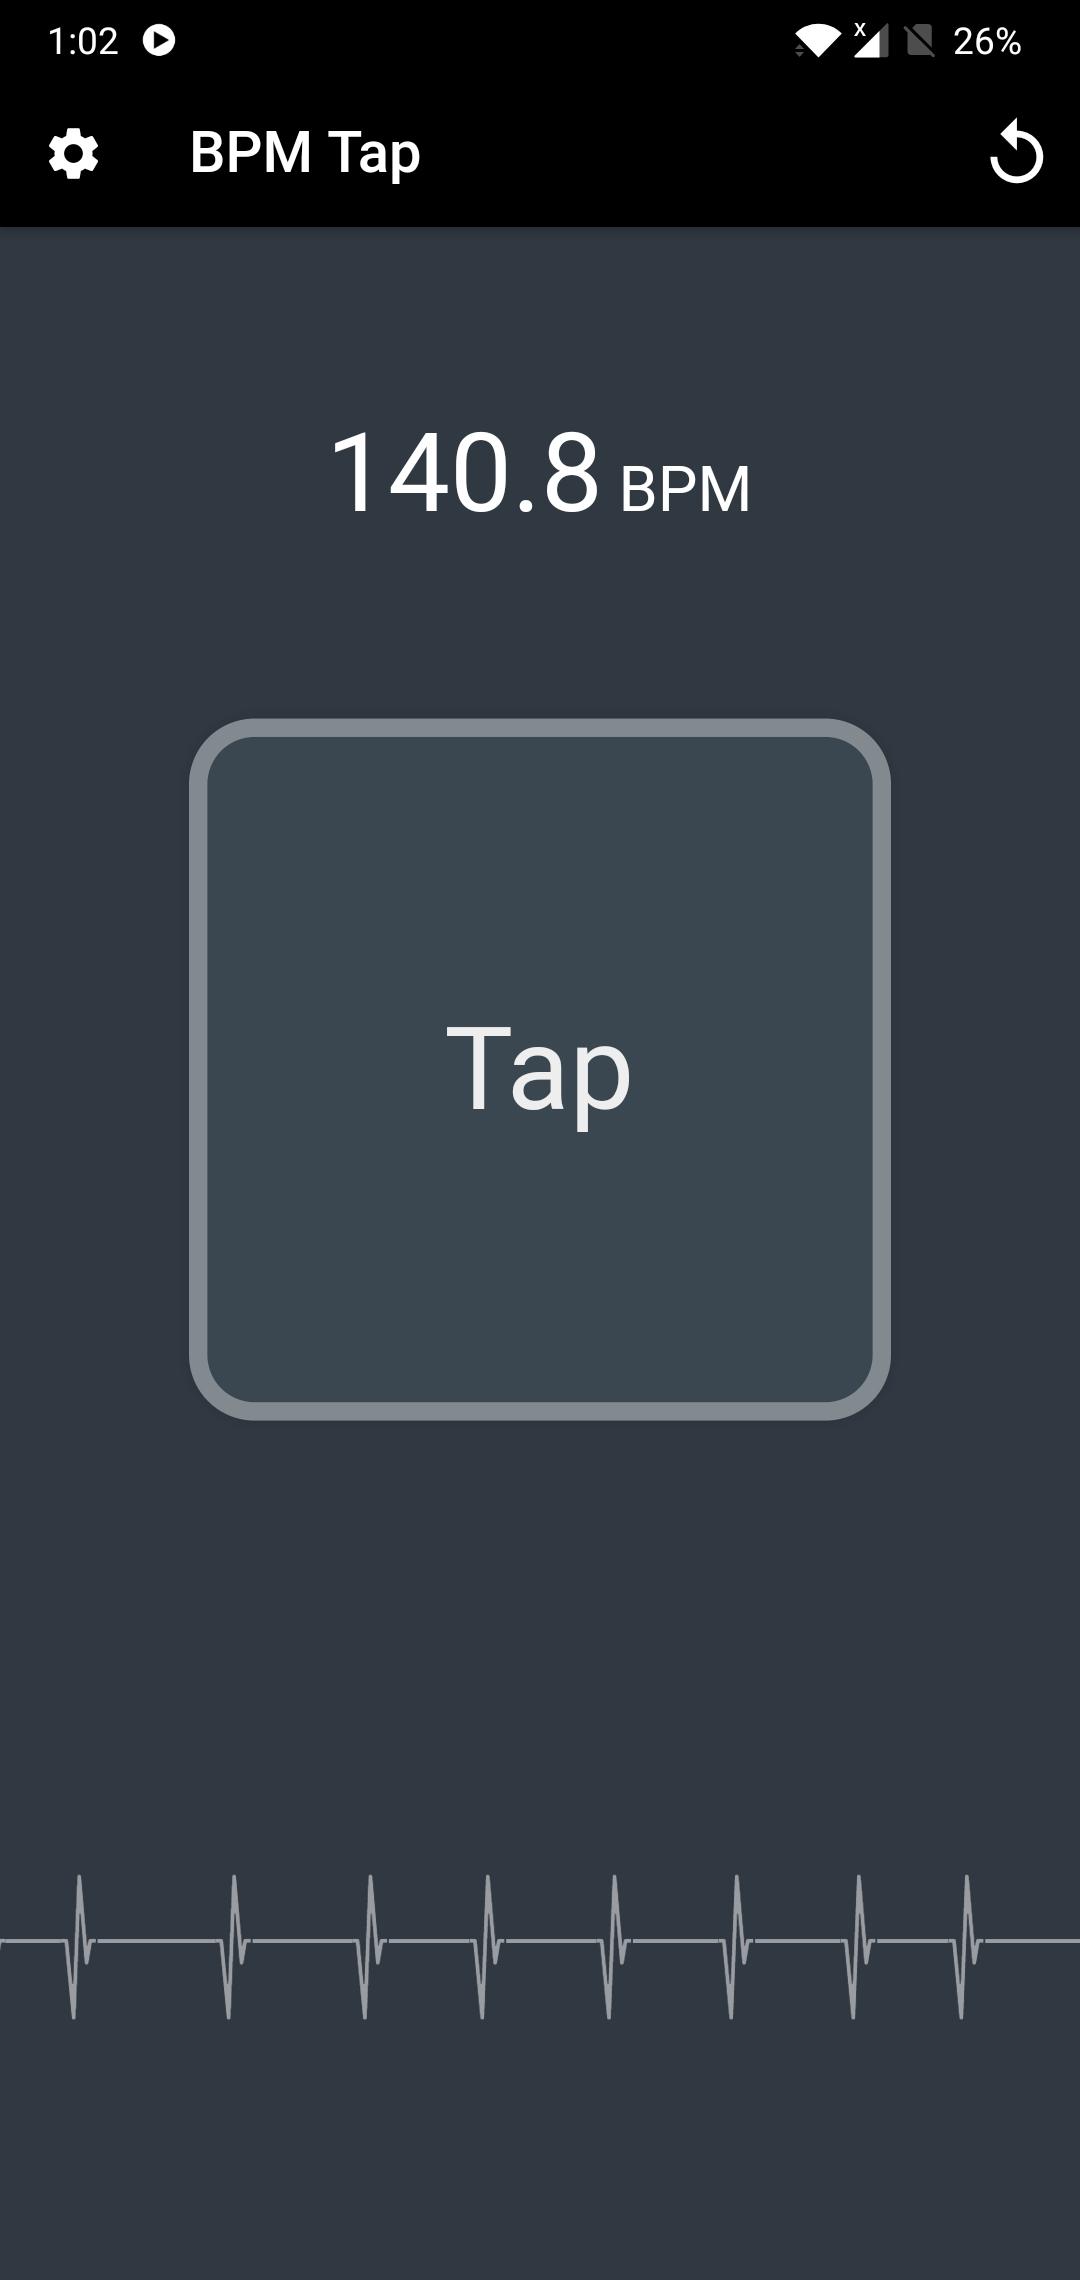 Tap bpm. BPM tap Android. BPM tap Android Lamps.